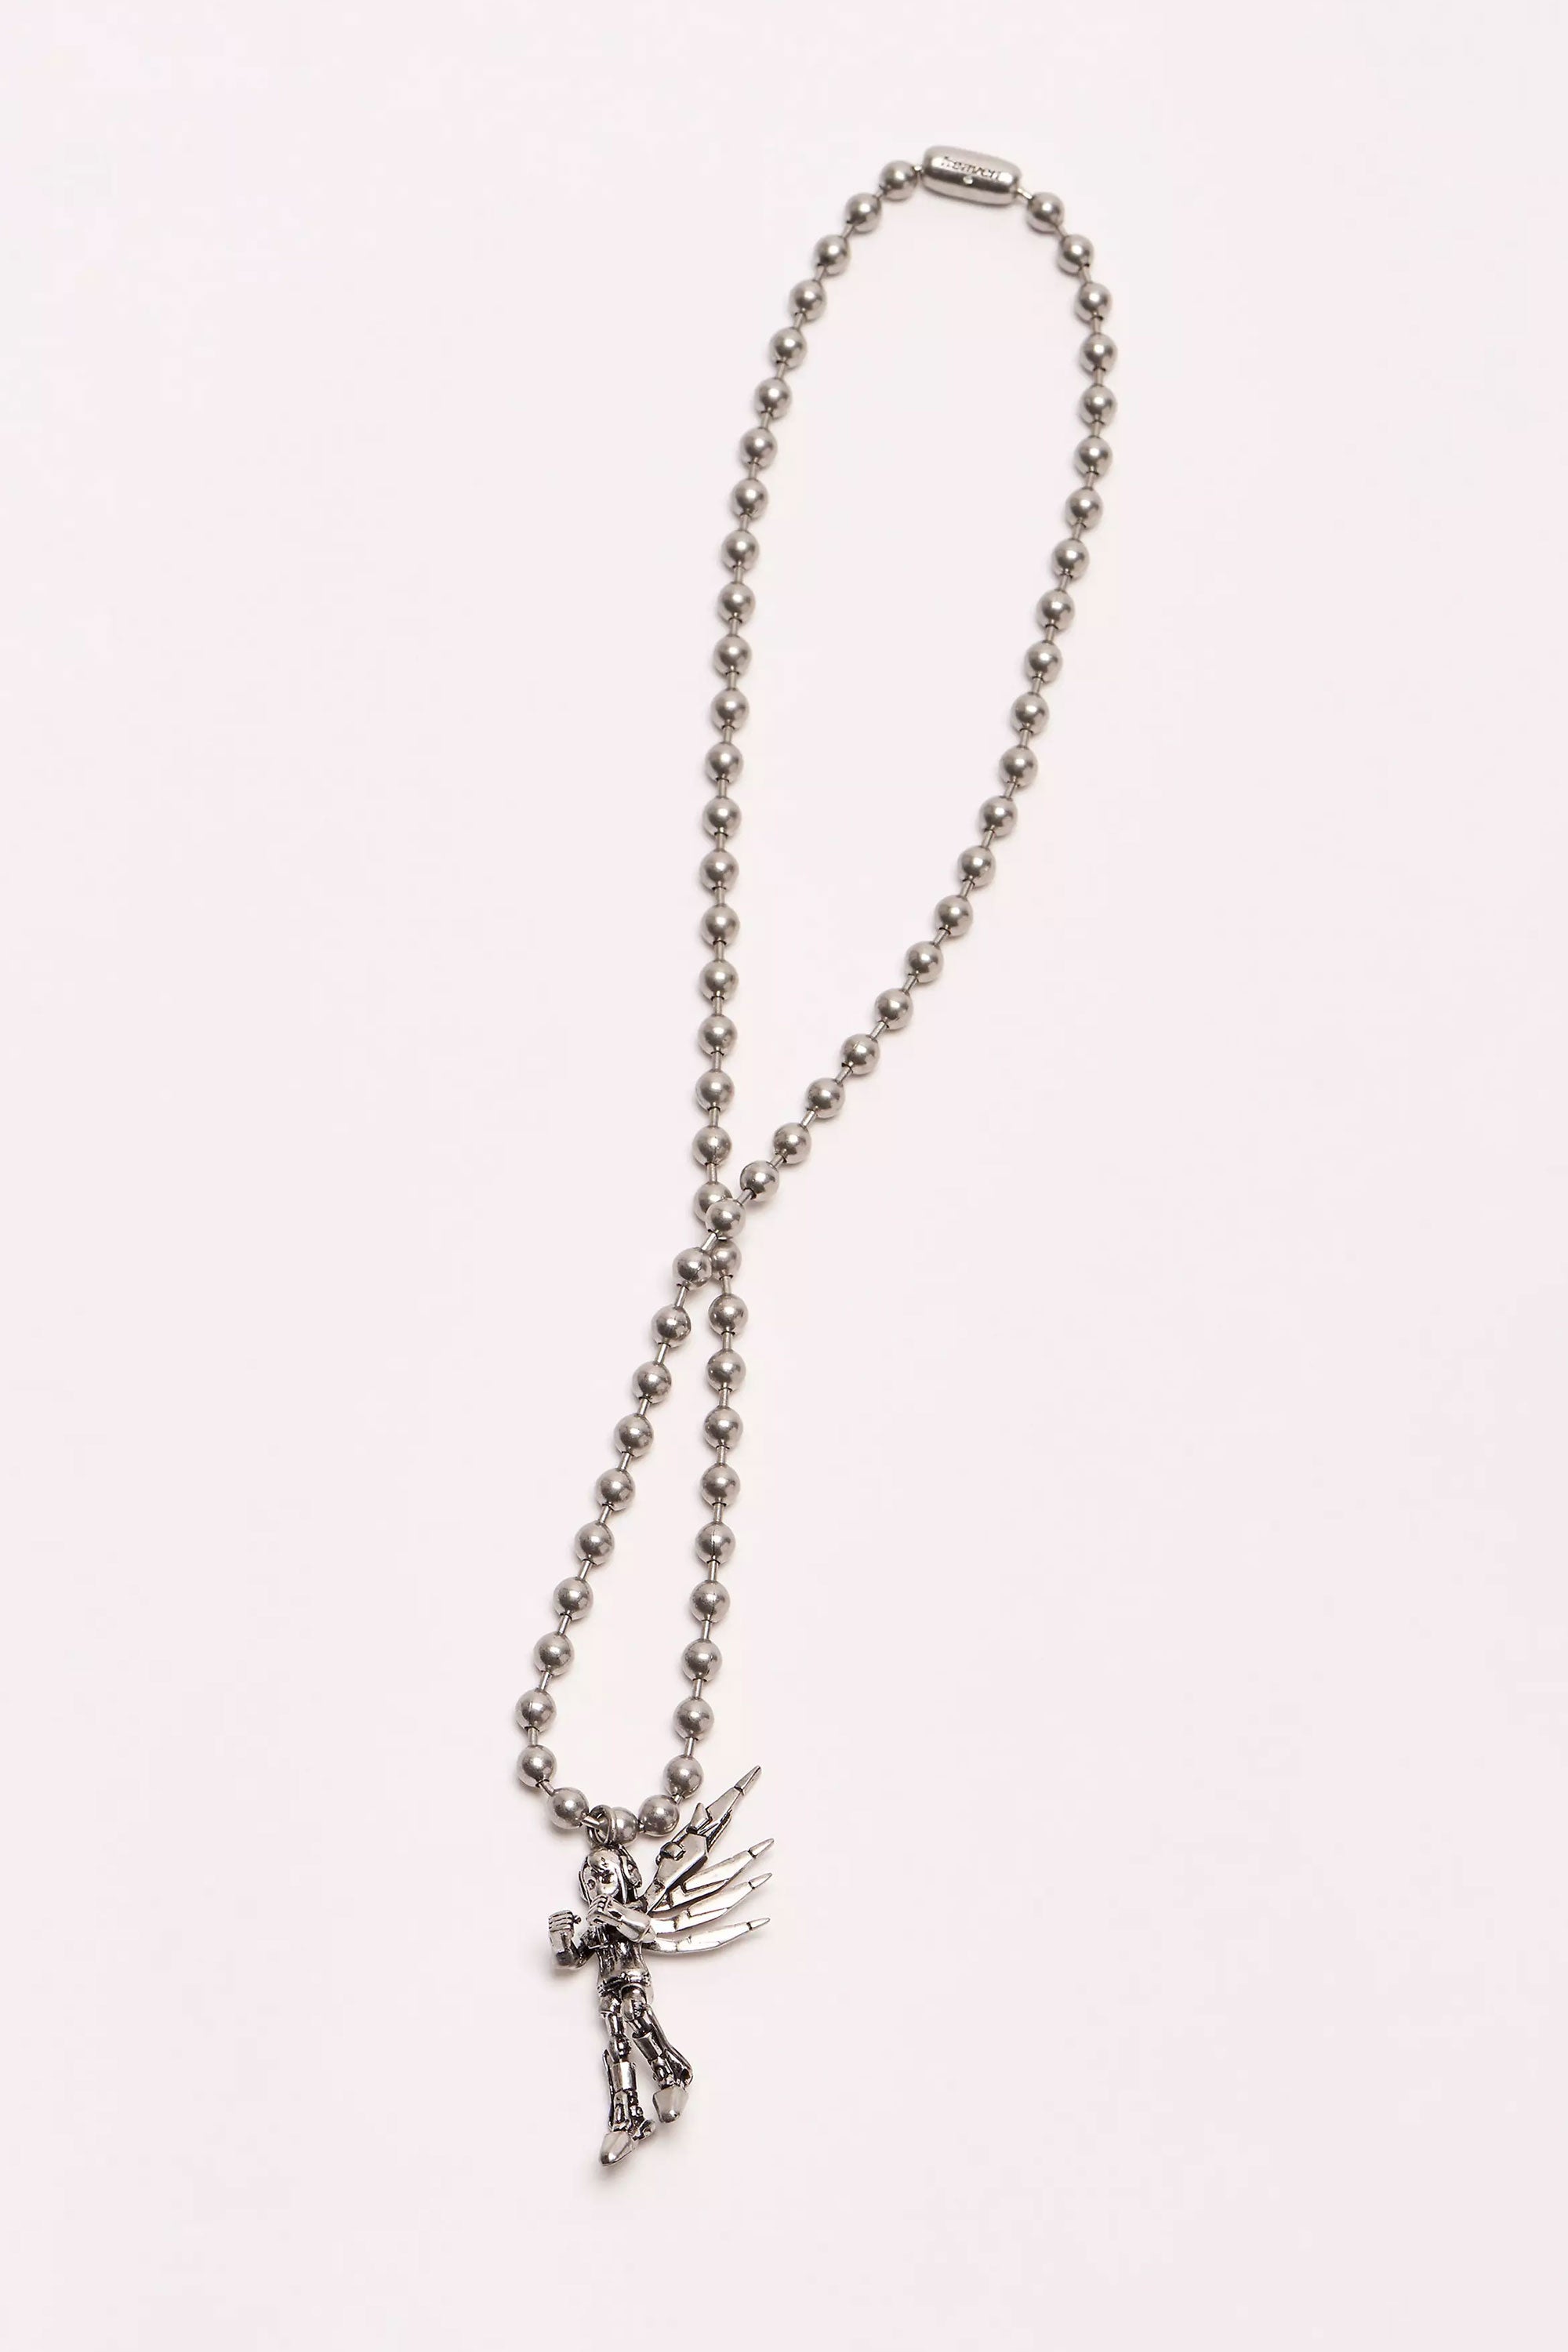 The HEAVEN - ROBOT GIRL PENDANT  available online with global shipping, and in PAM Stores Melbourne and Sydney.